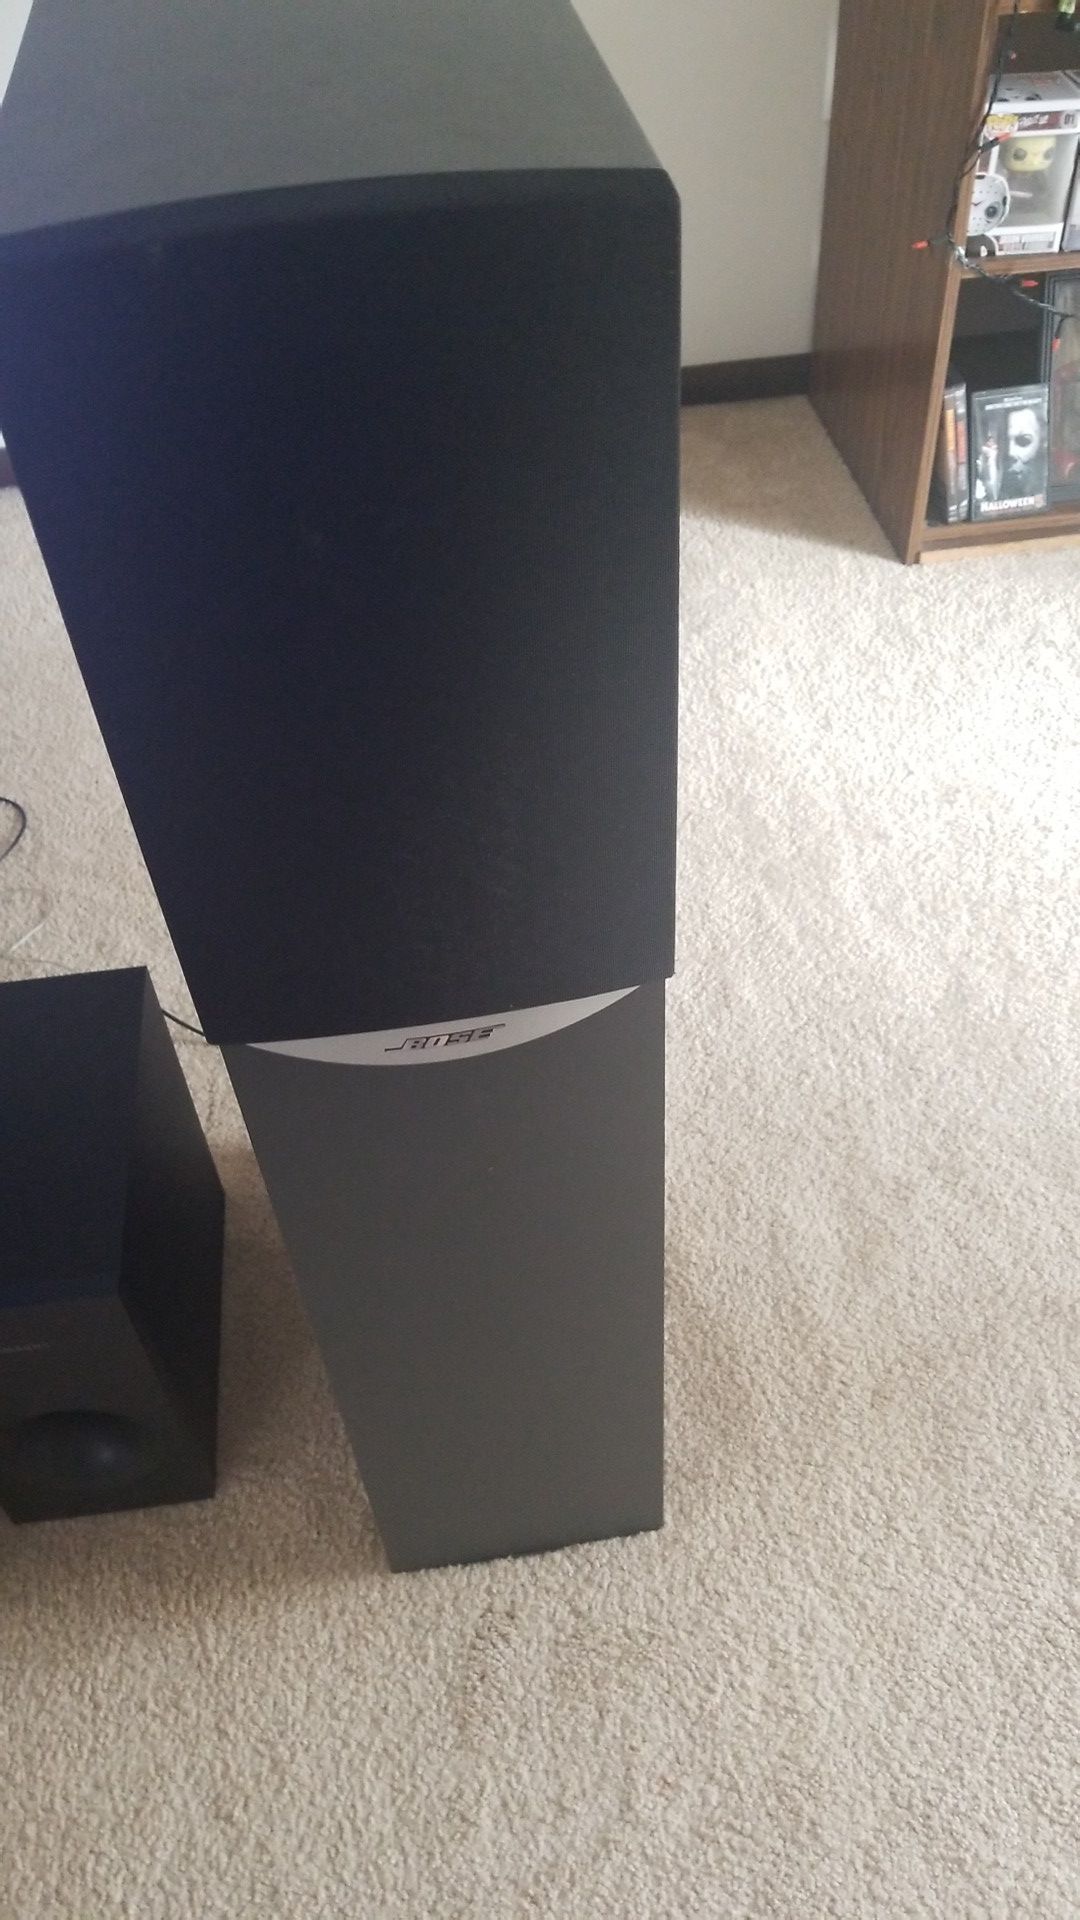 2 bose tower speakers and yamaha receiver